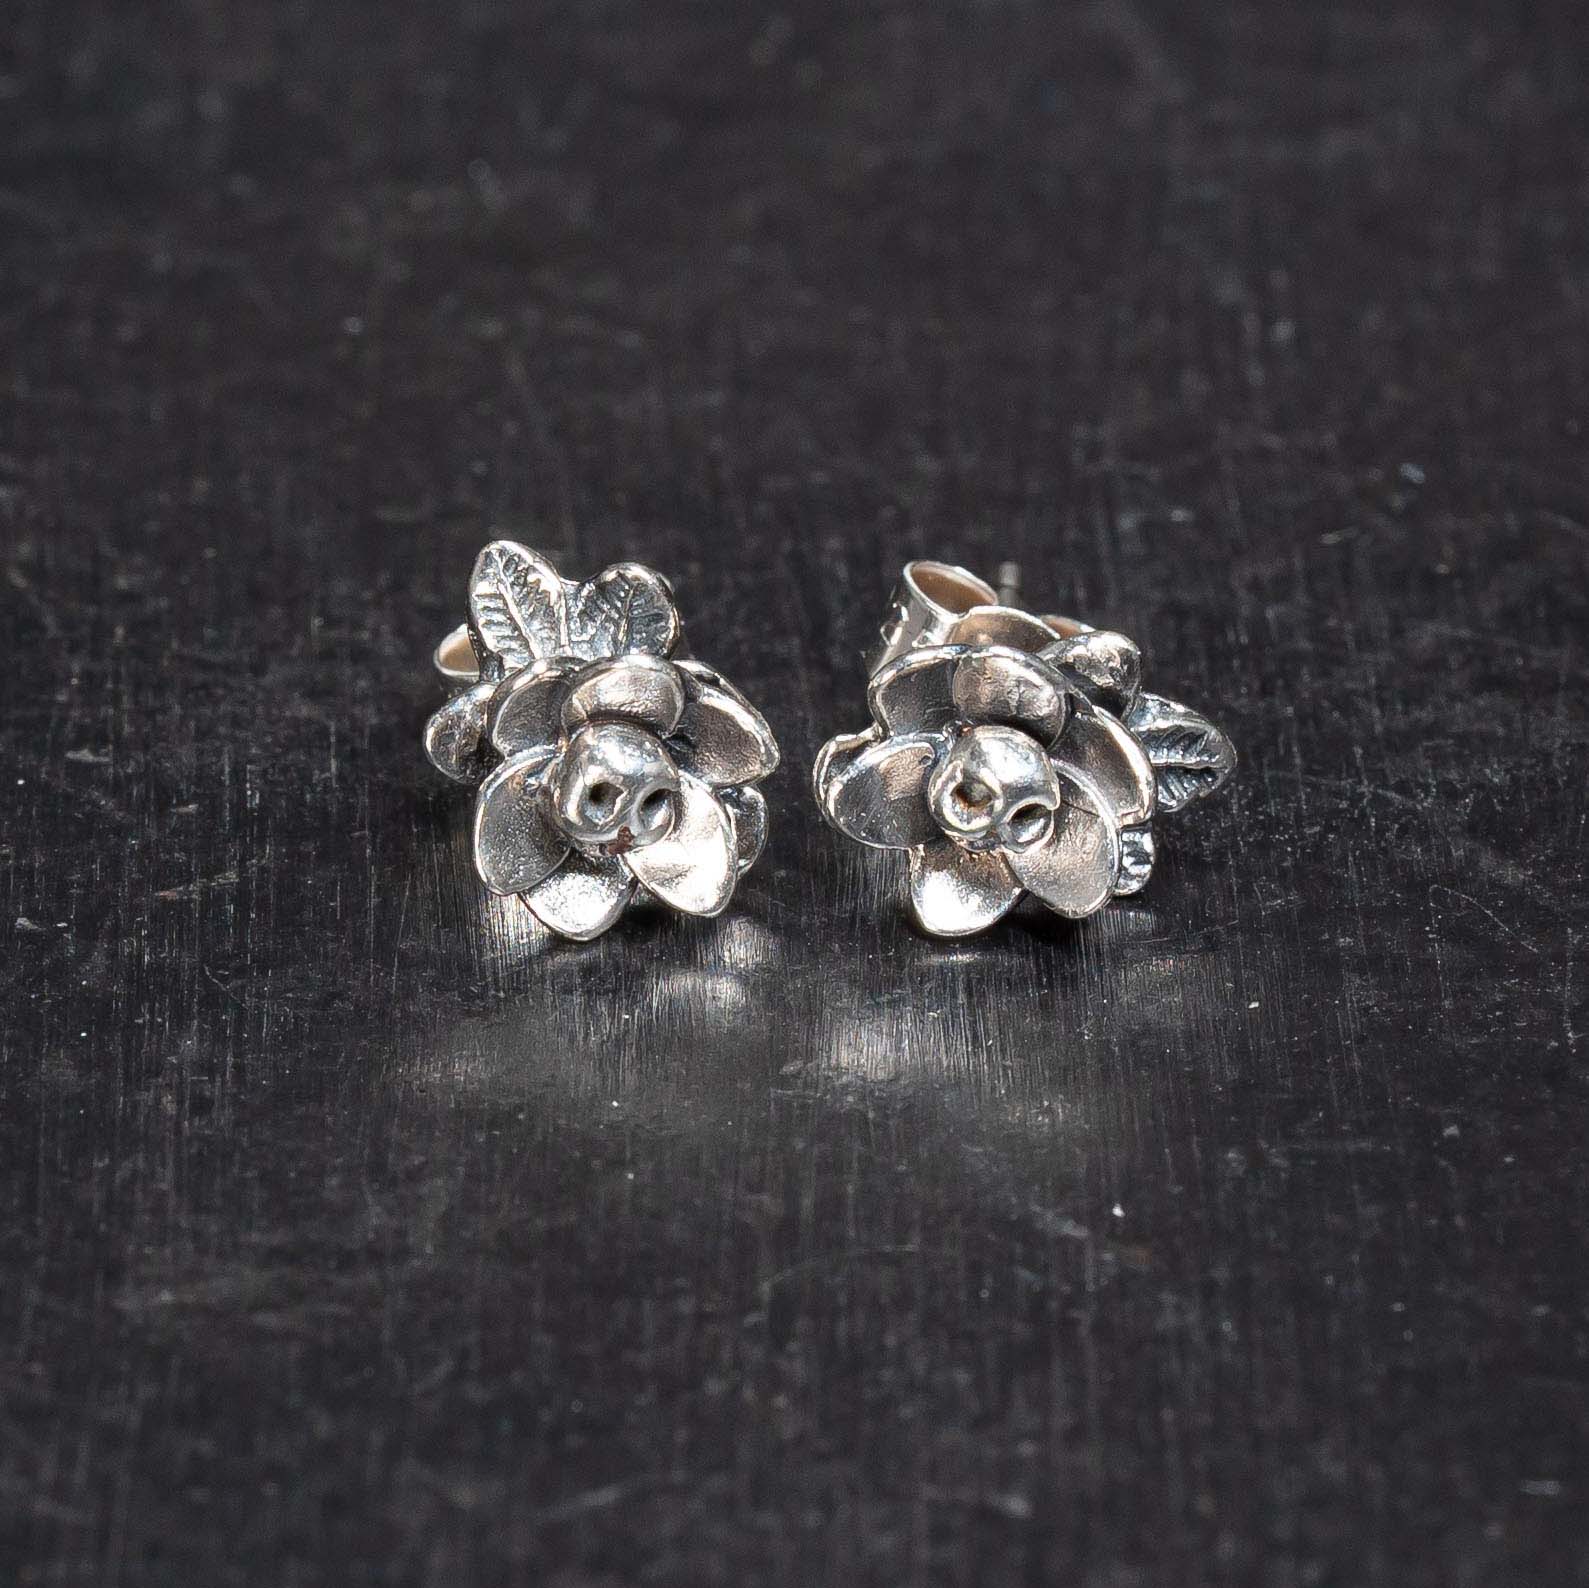 Belladonna plant earrings with skull detail